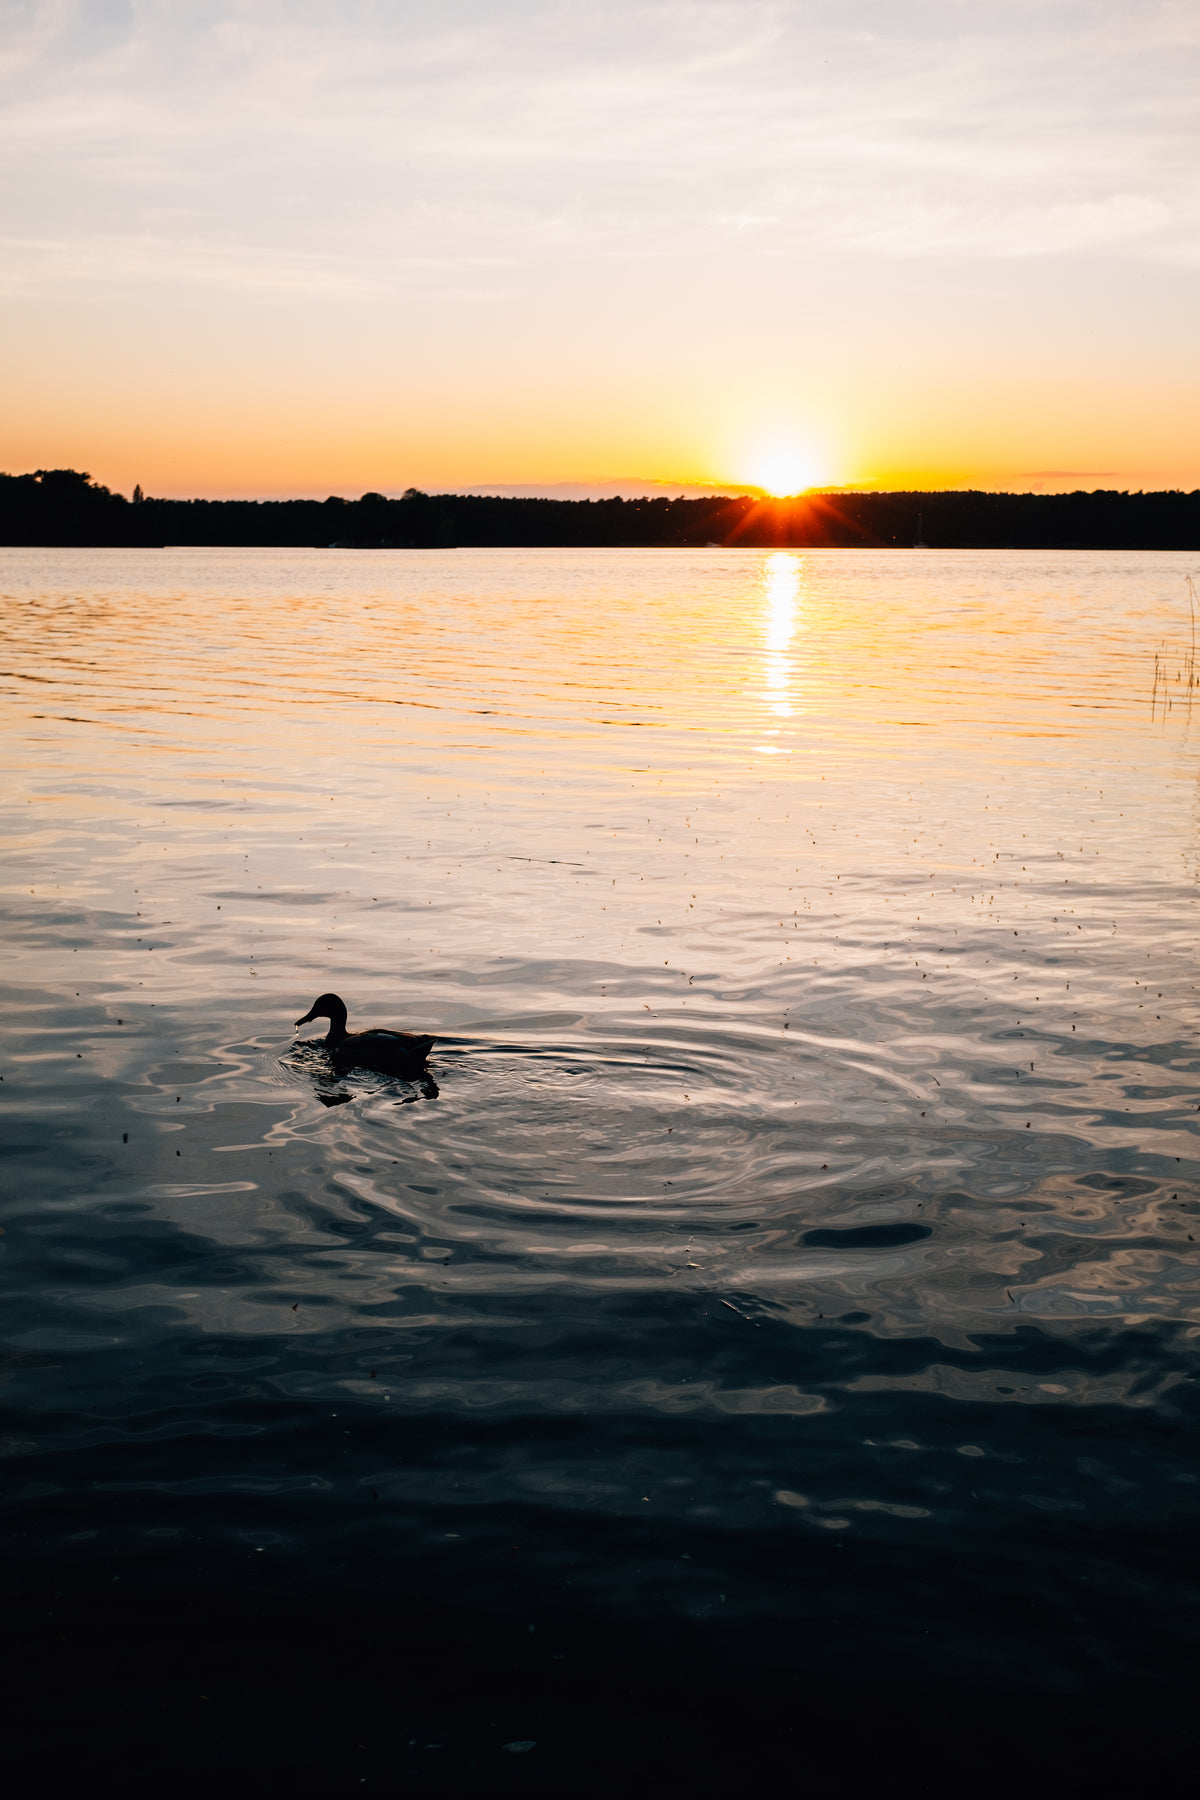 sun sets behind trees as a duck floats on the water